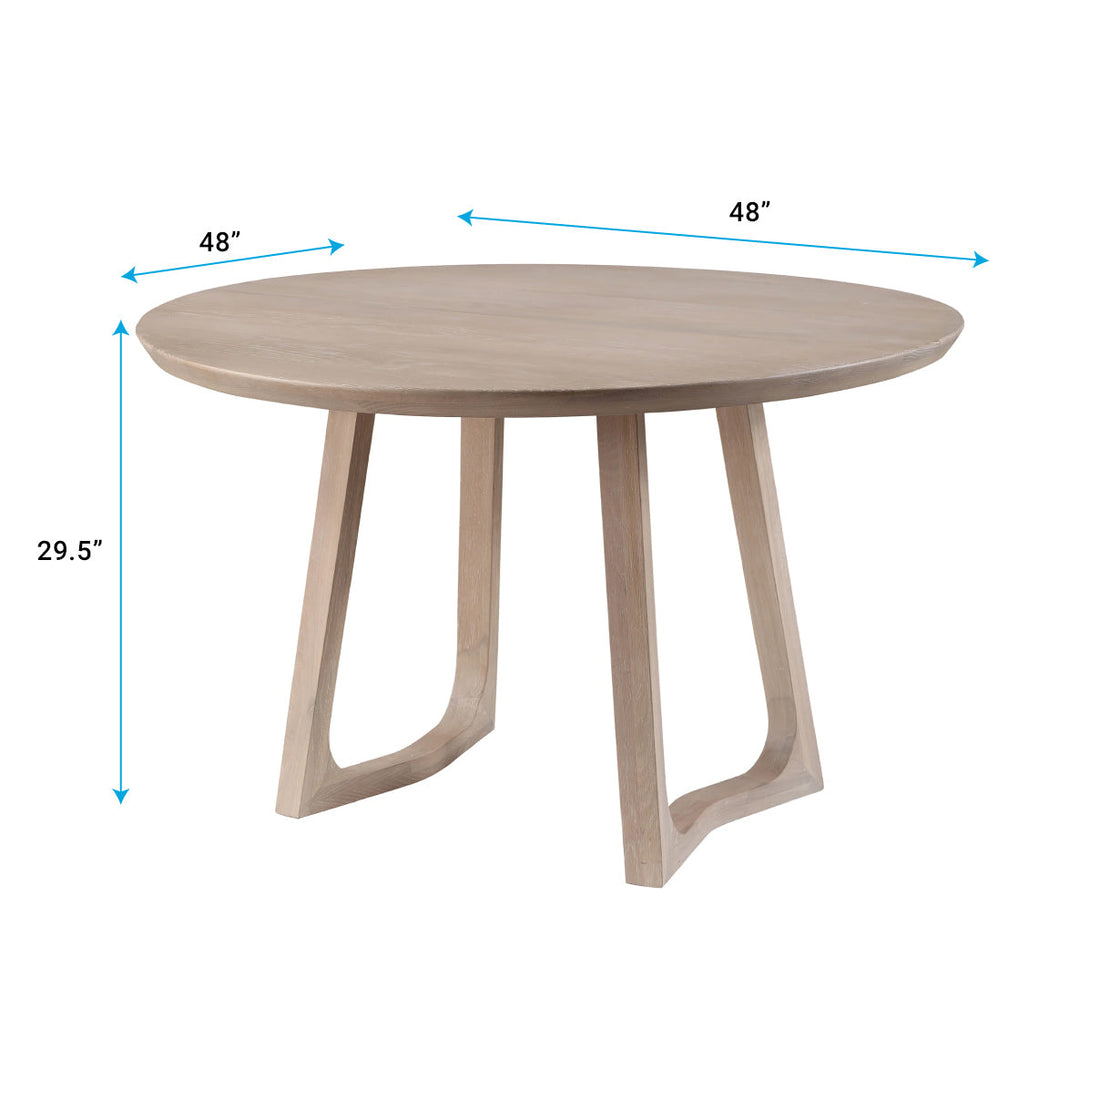 Round Dining Table Oak: Oak Elegance in a Round Form